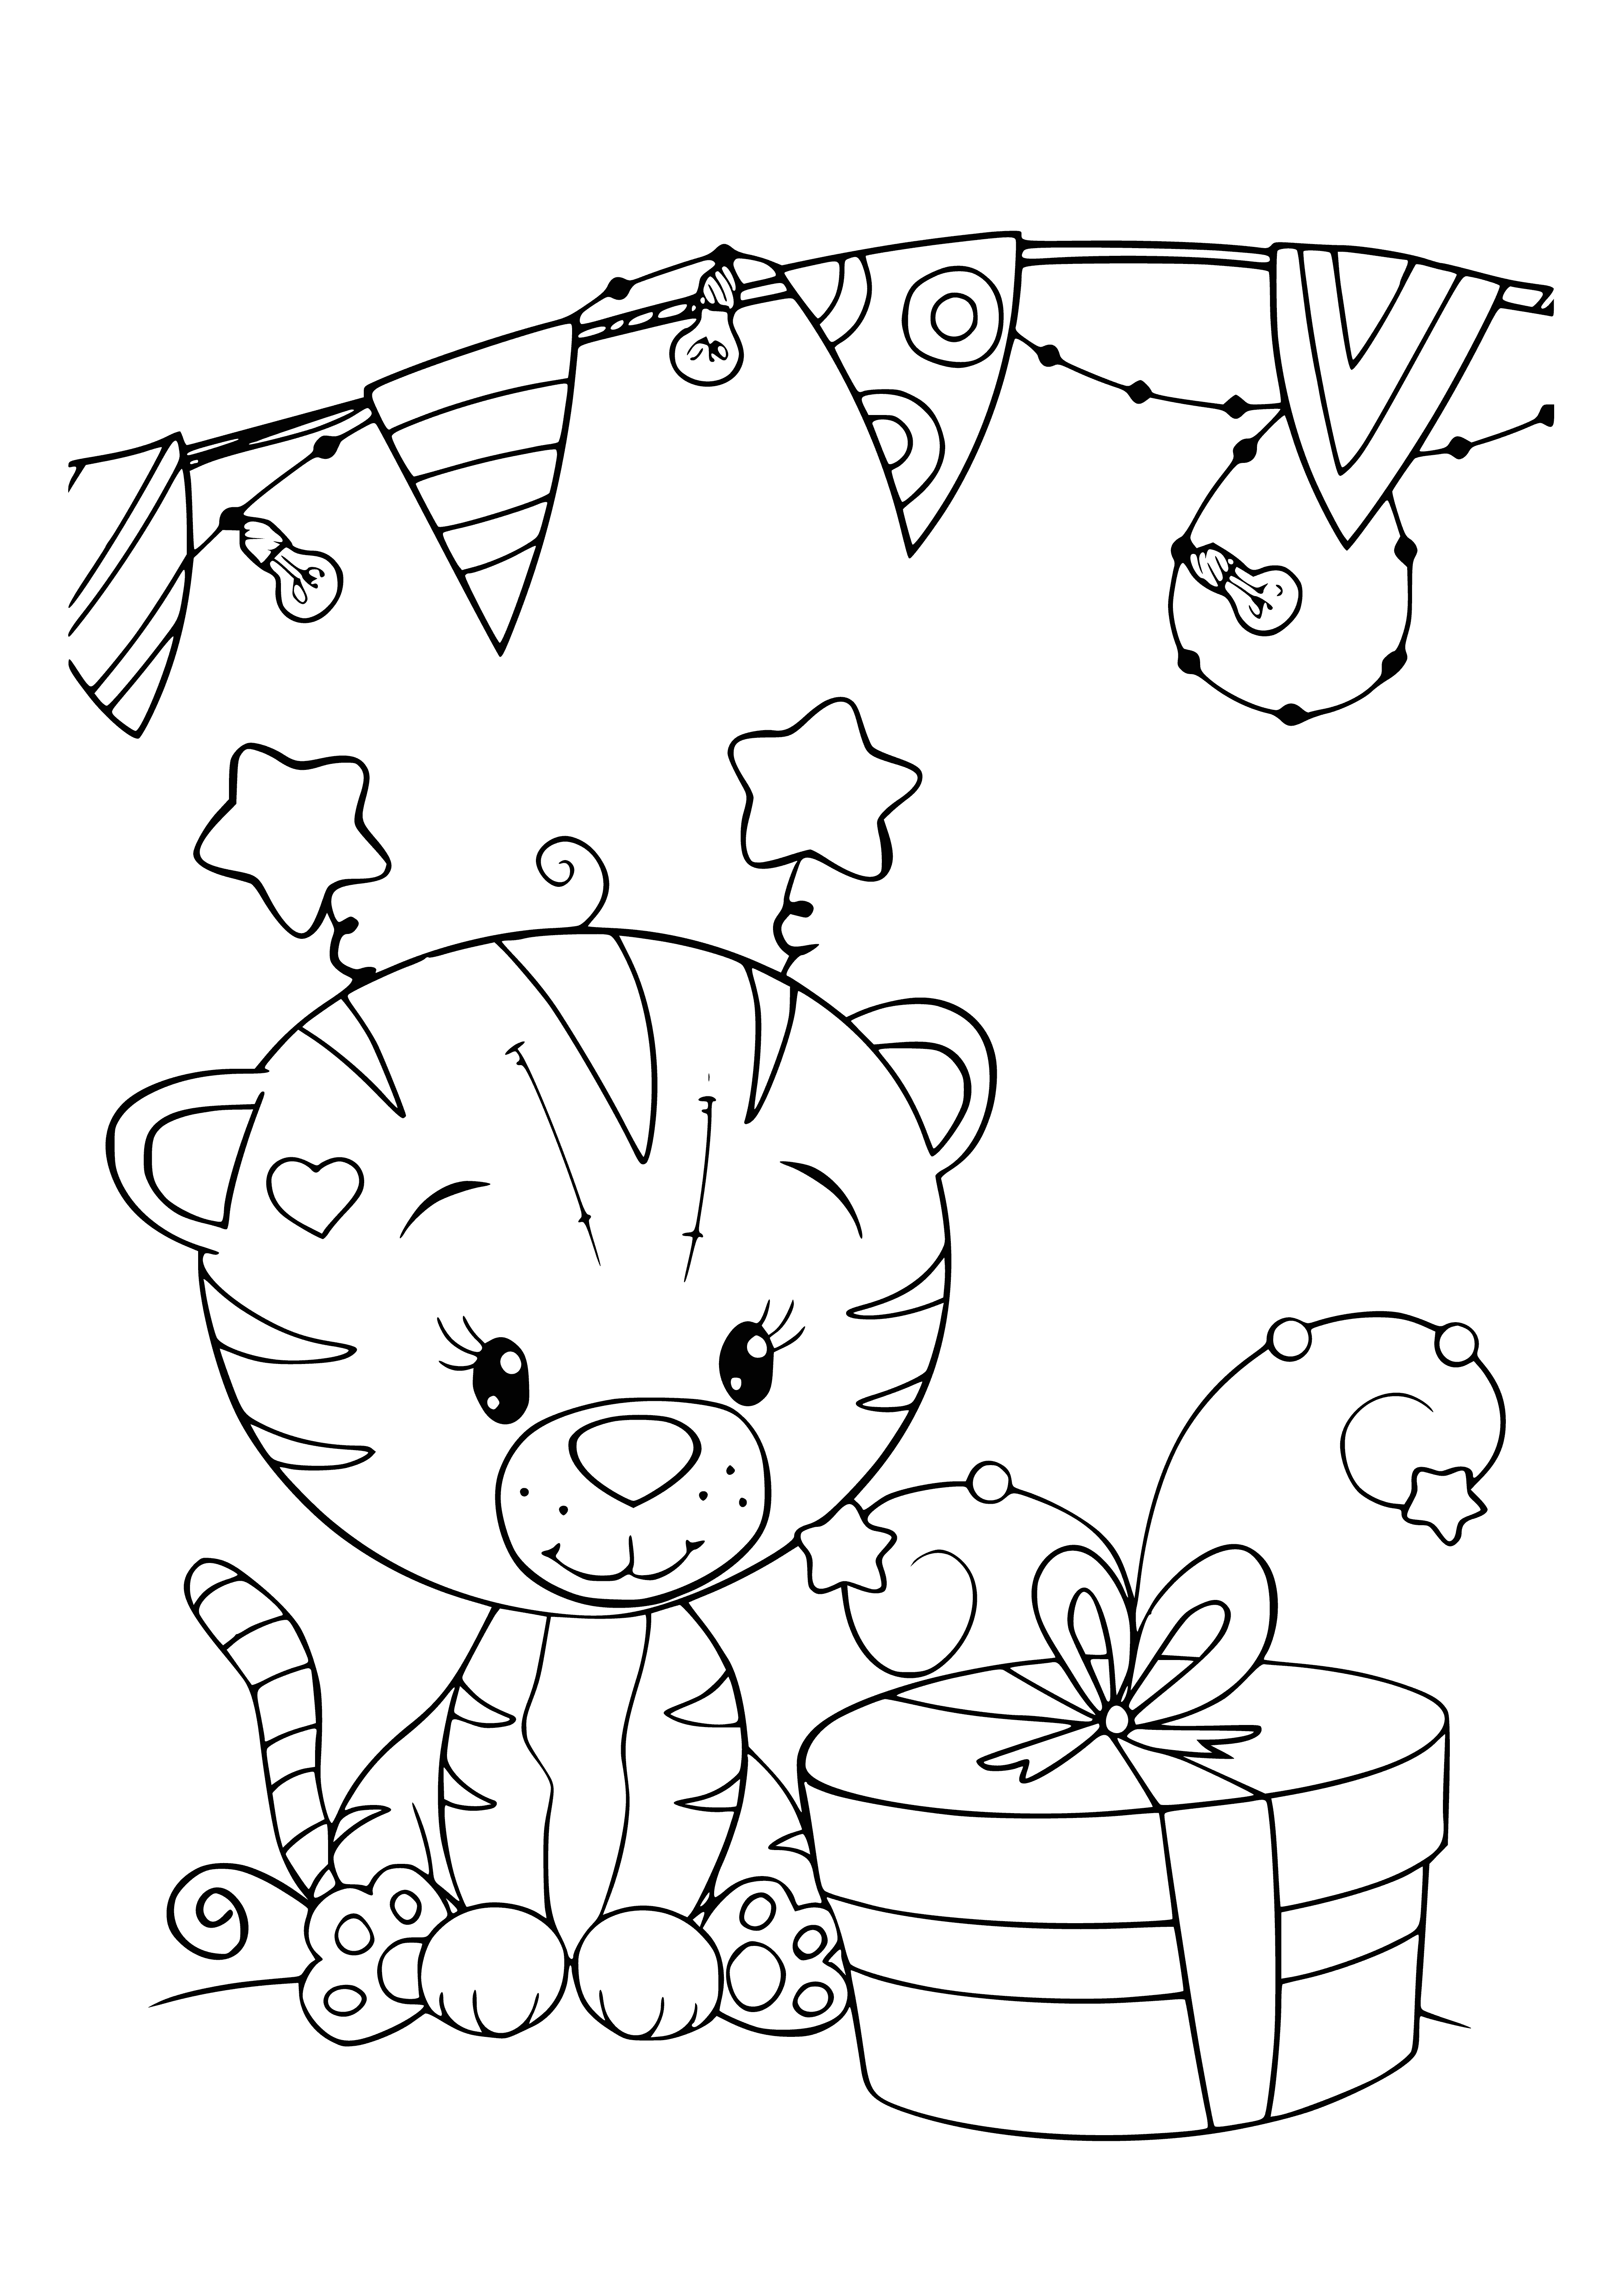 Tiger cub with a gift coloring page